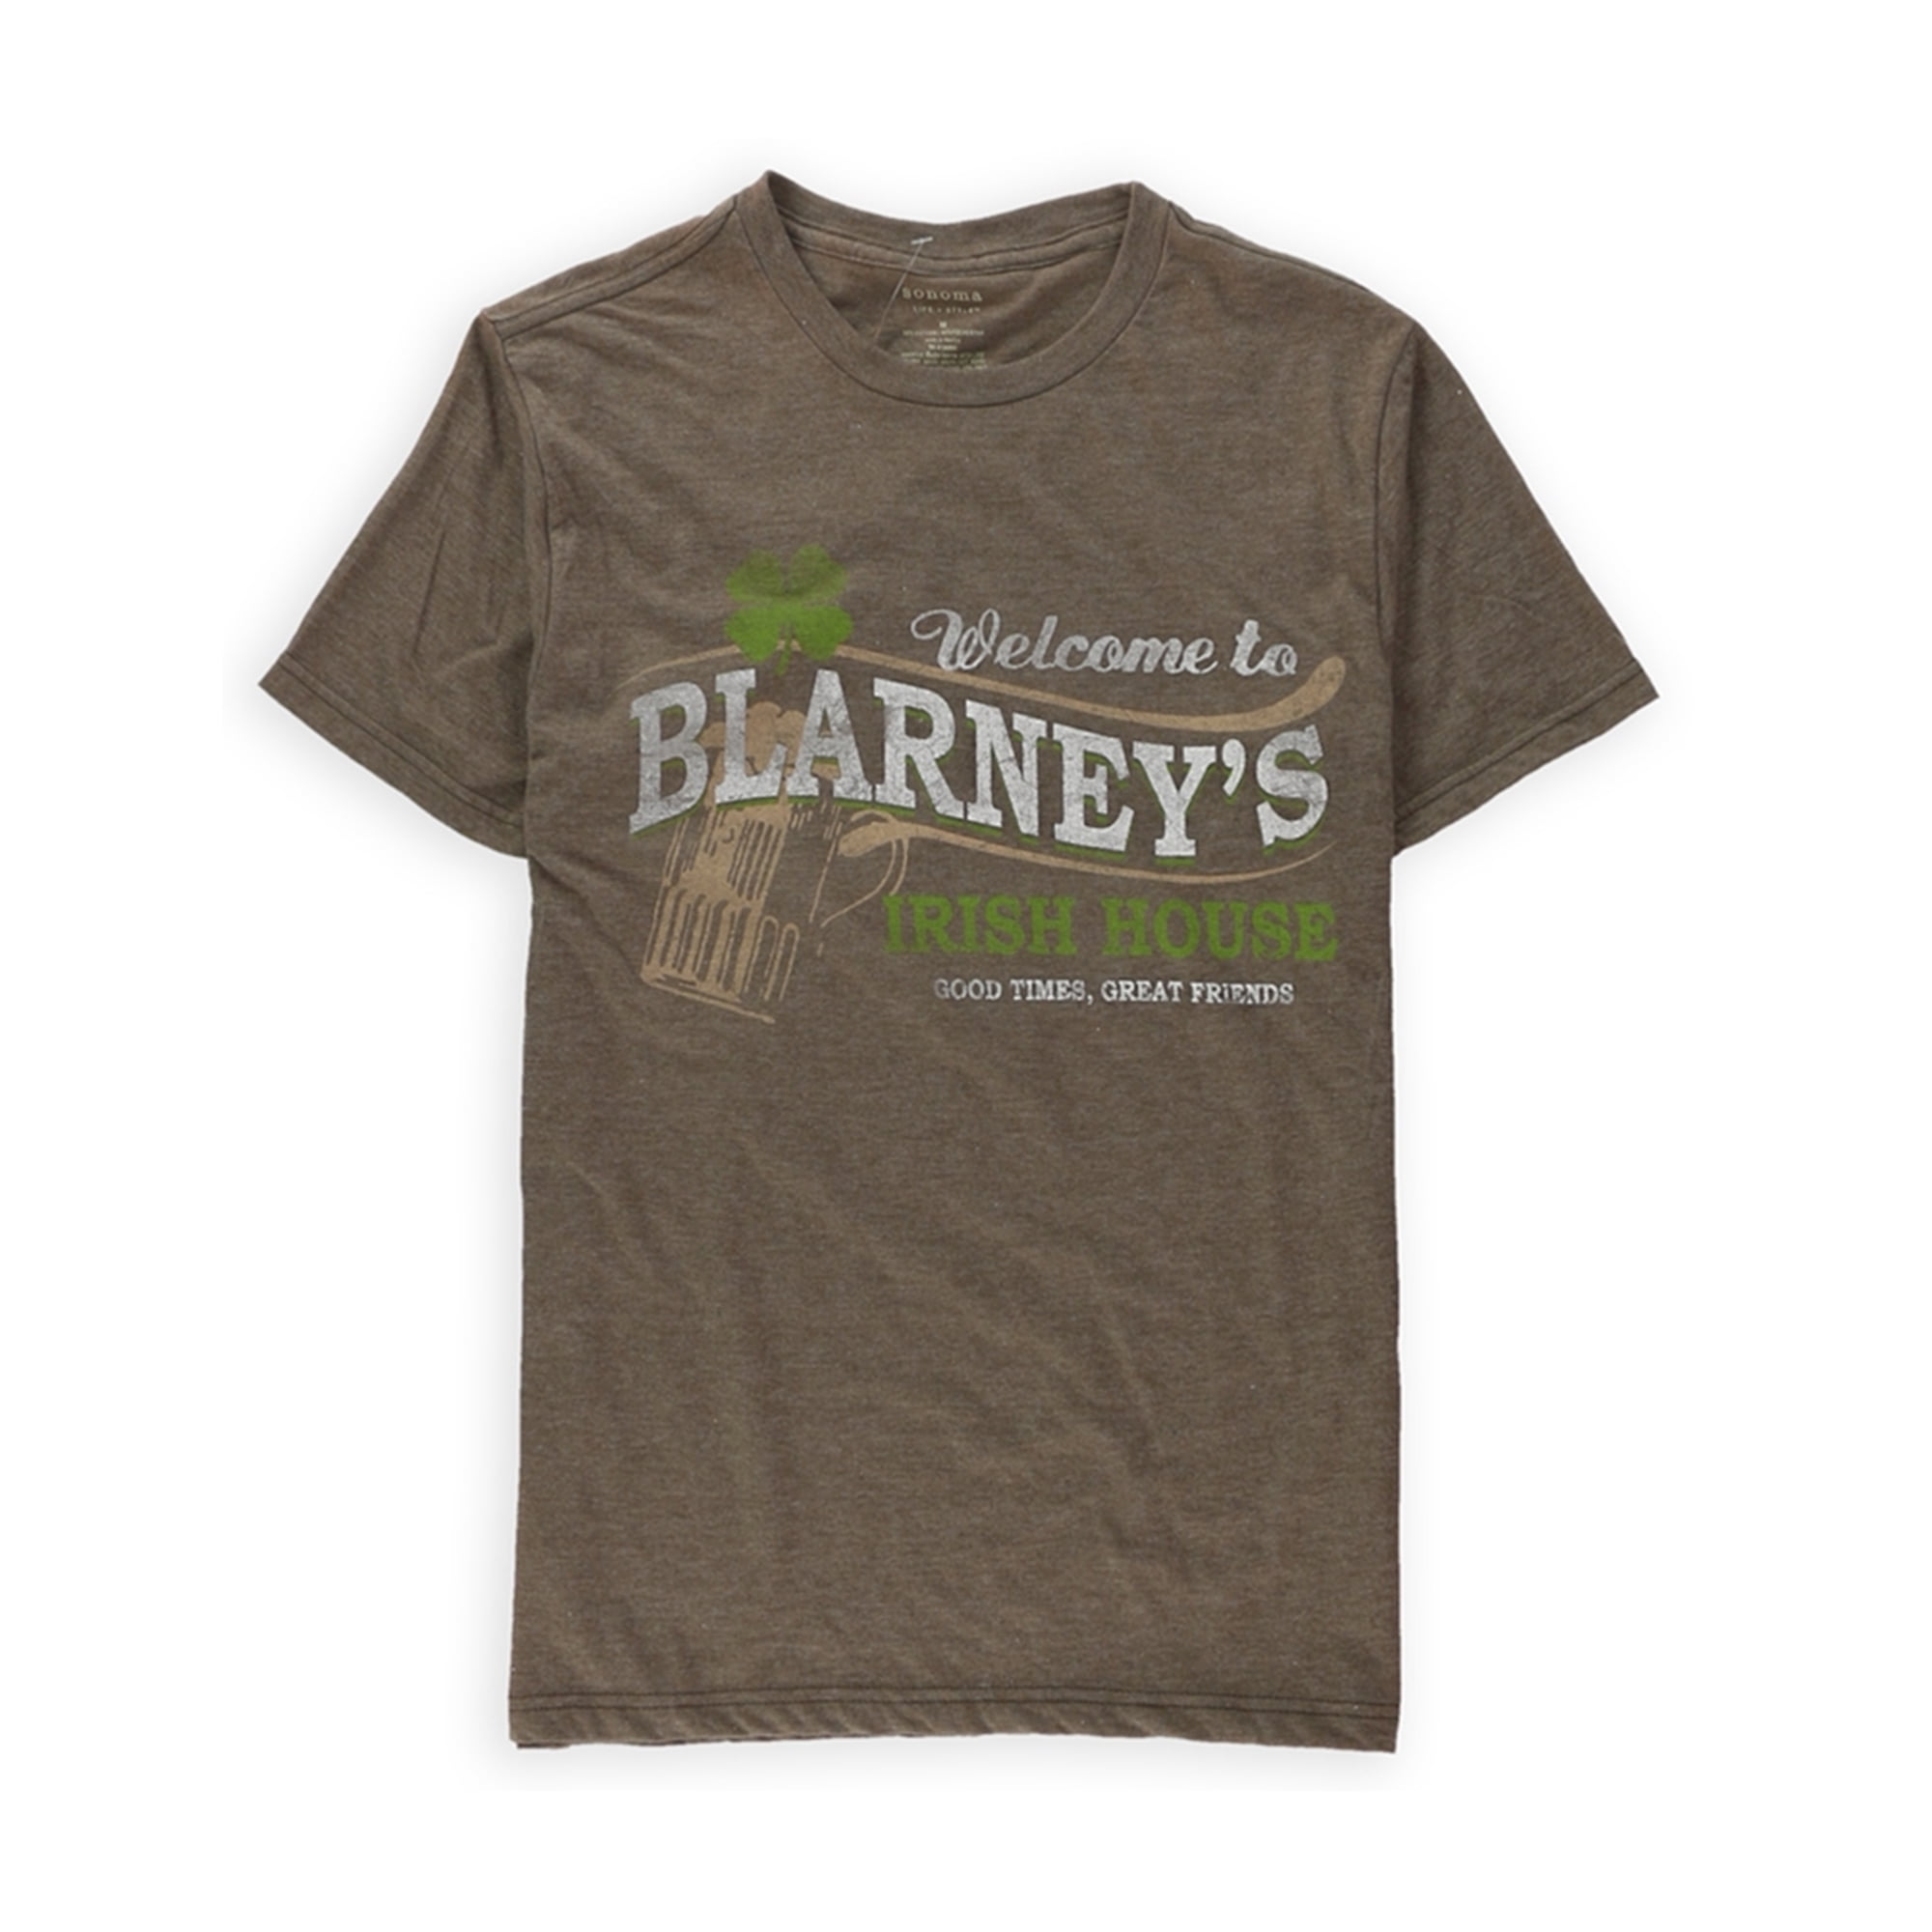 SONOMA life+style Mens Blarney's Graphic T-Shirt, Brown, Small